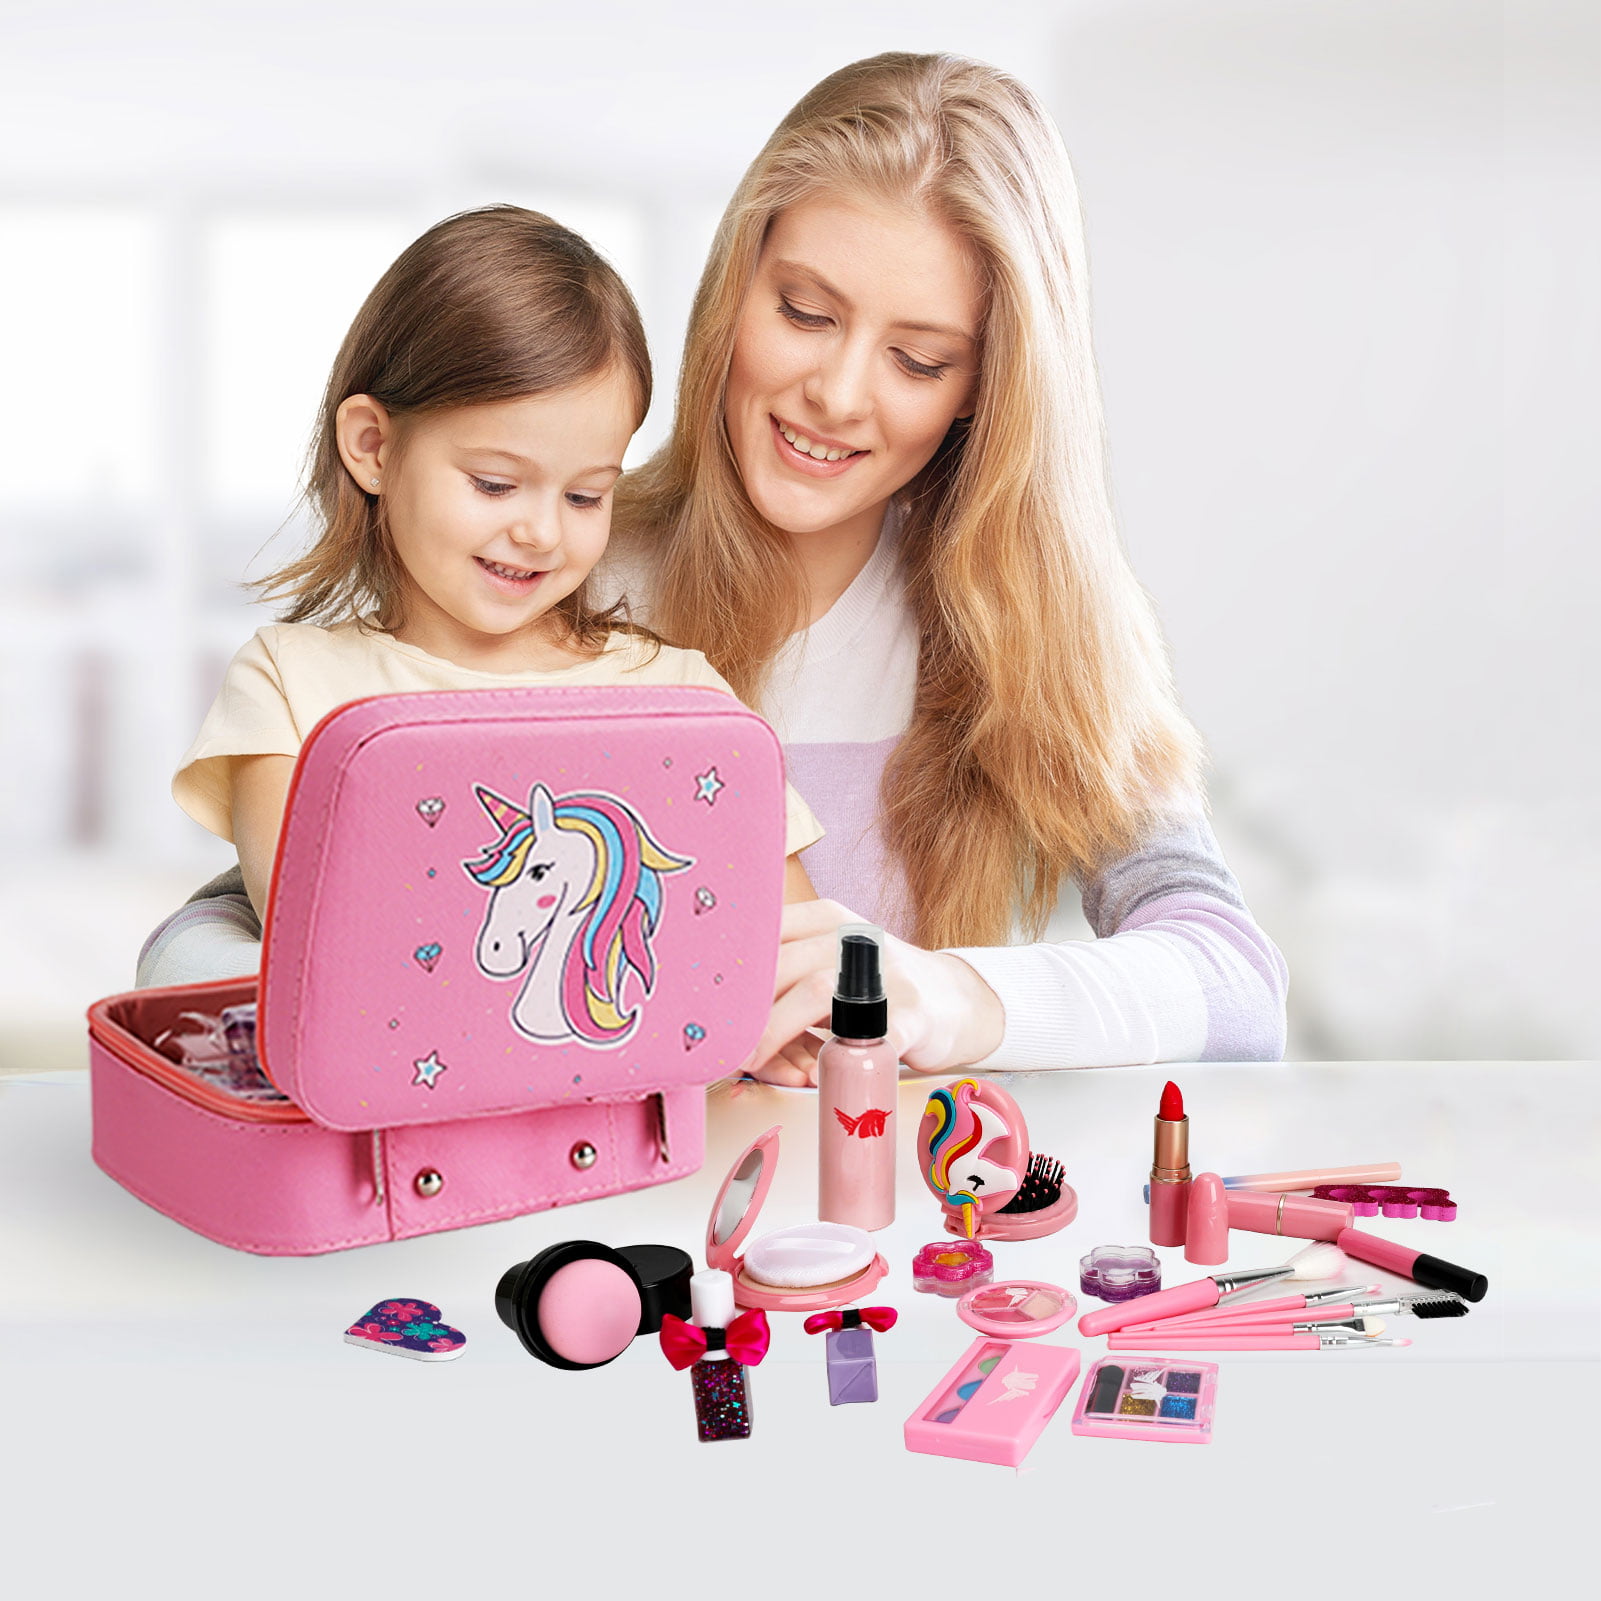 EMEJIRUSHI Kid Makeup Set for Girls - Toys for Girls, Non-Toxic & Washable  Princess Dress Up Set for Kids Ages 3-13, Ideal for Christmas & Birthday